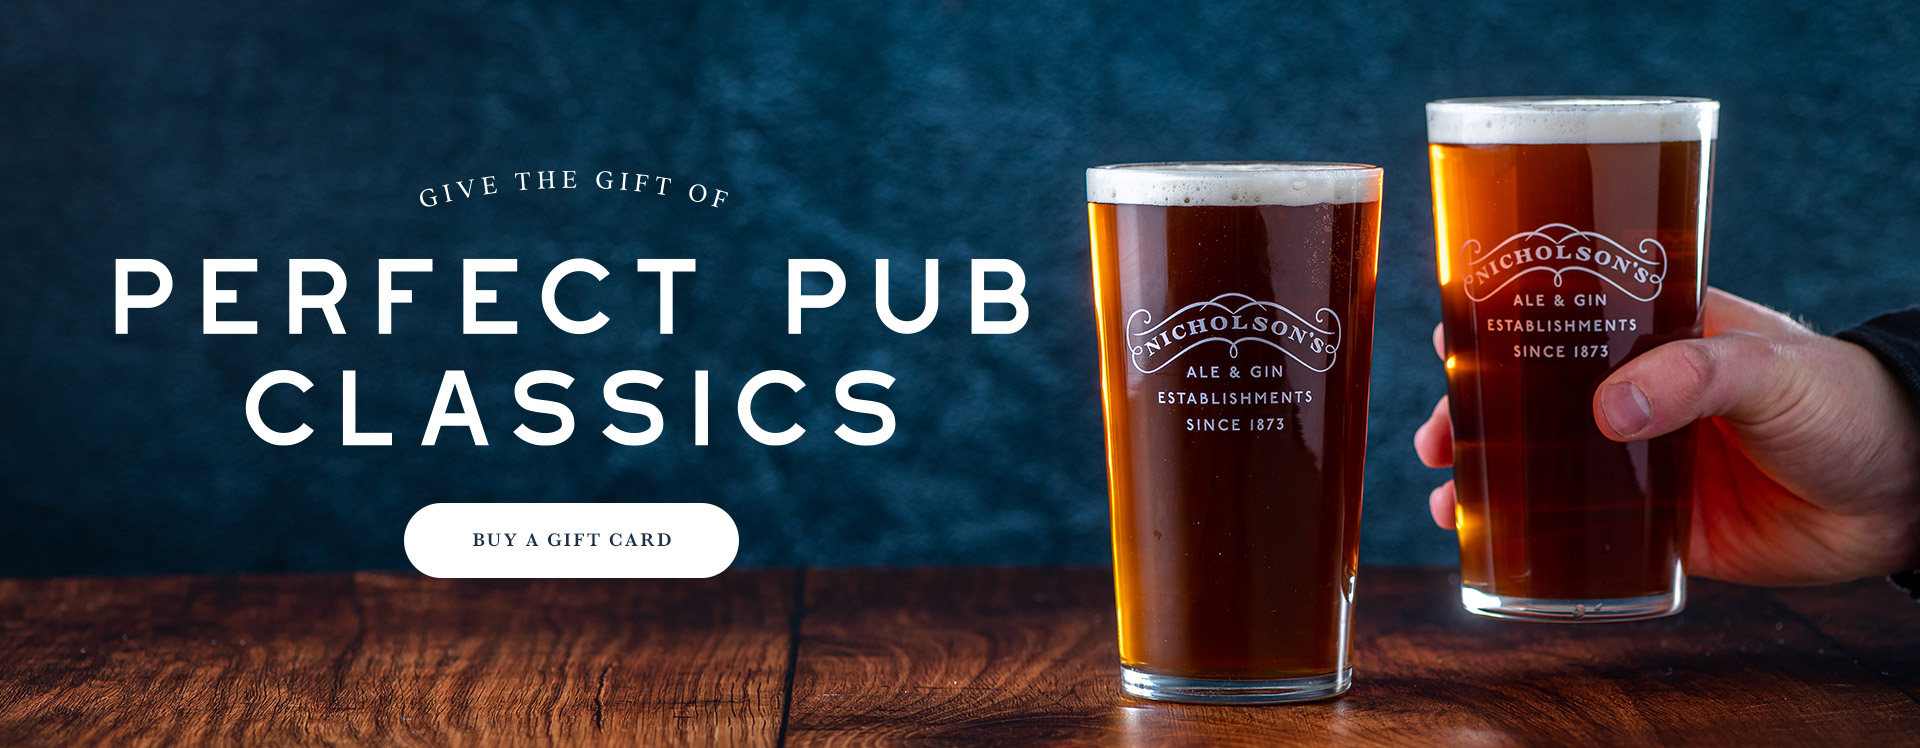 Nicholson’s Pub Gift Voucher at The Walrus and The Carpenter in London